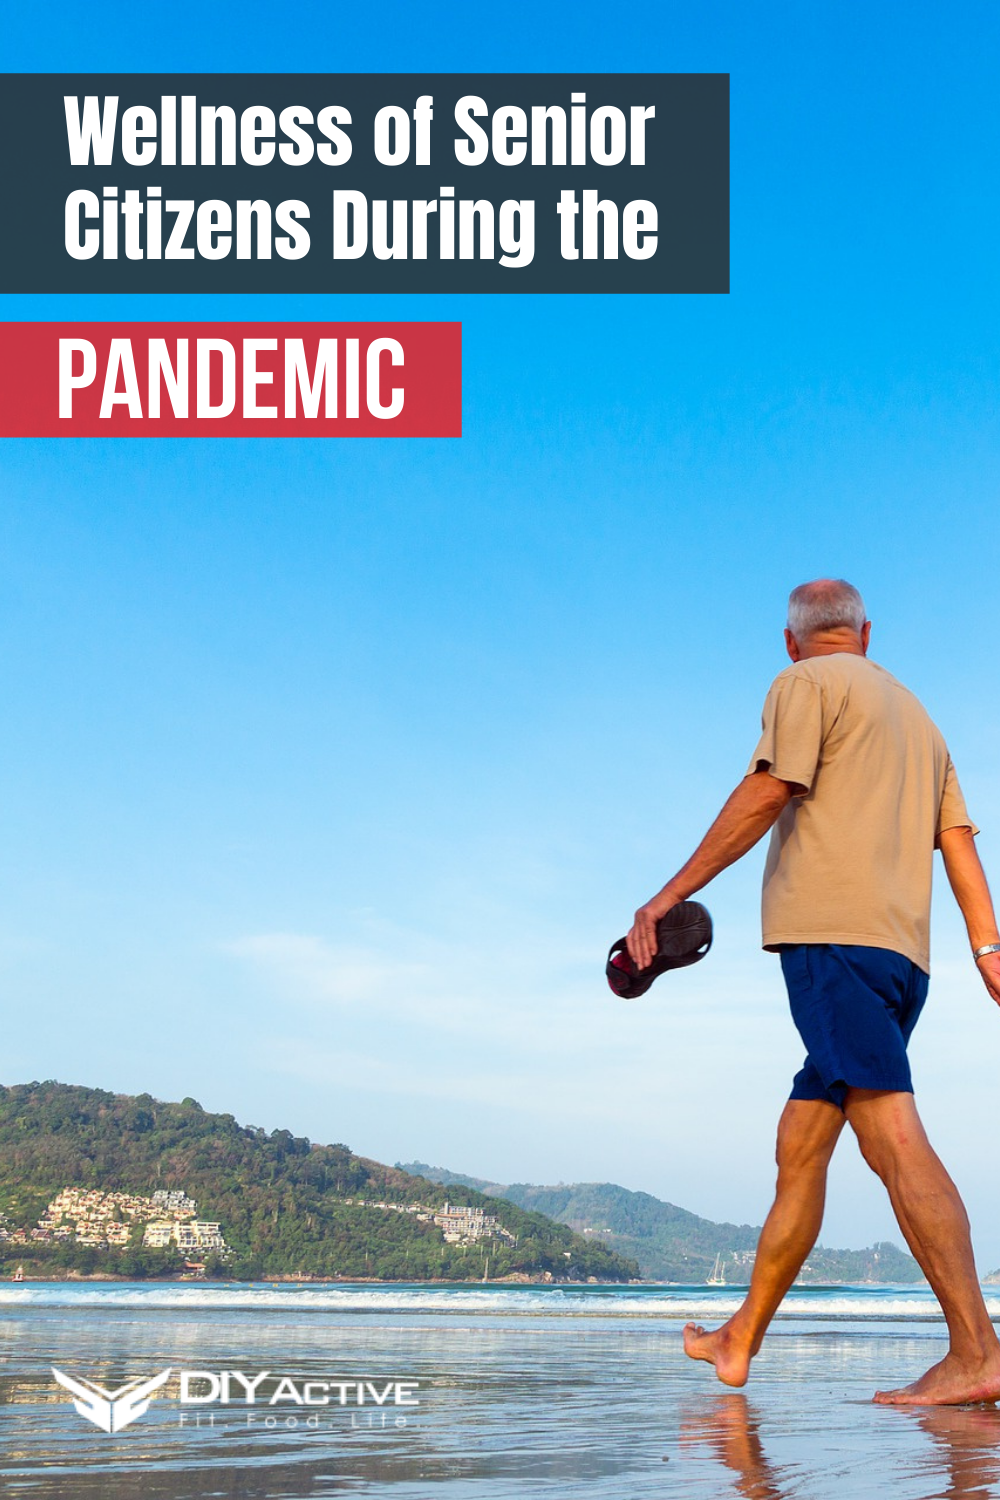 How to Maintain the Wellness of Senior Citizens During the Pandemic